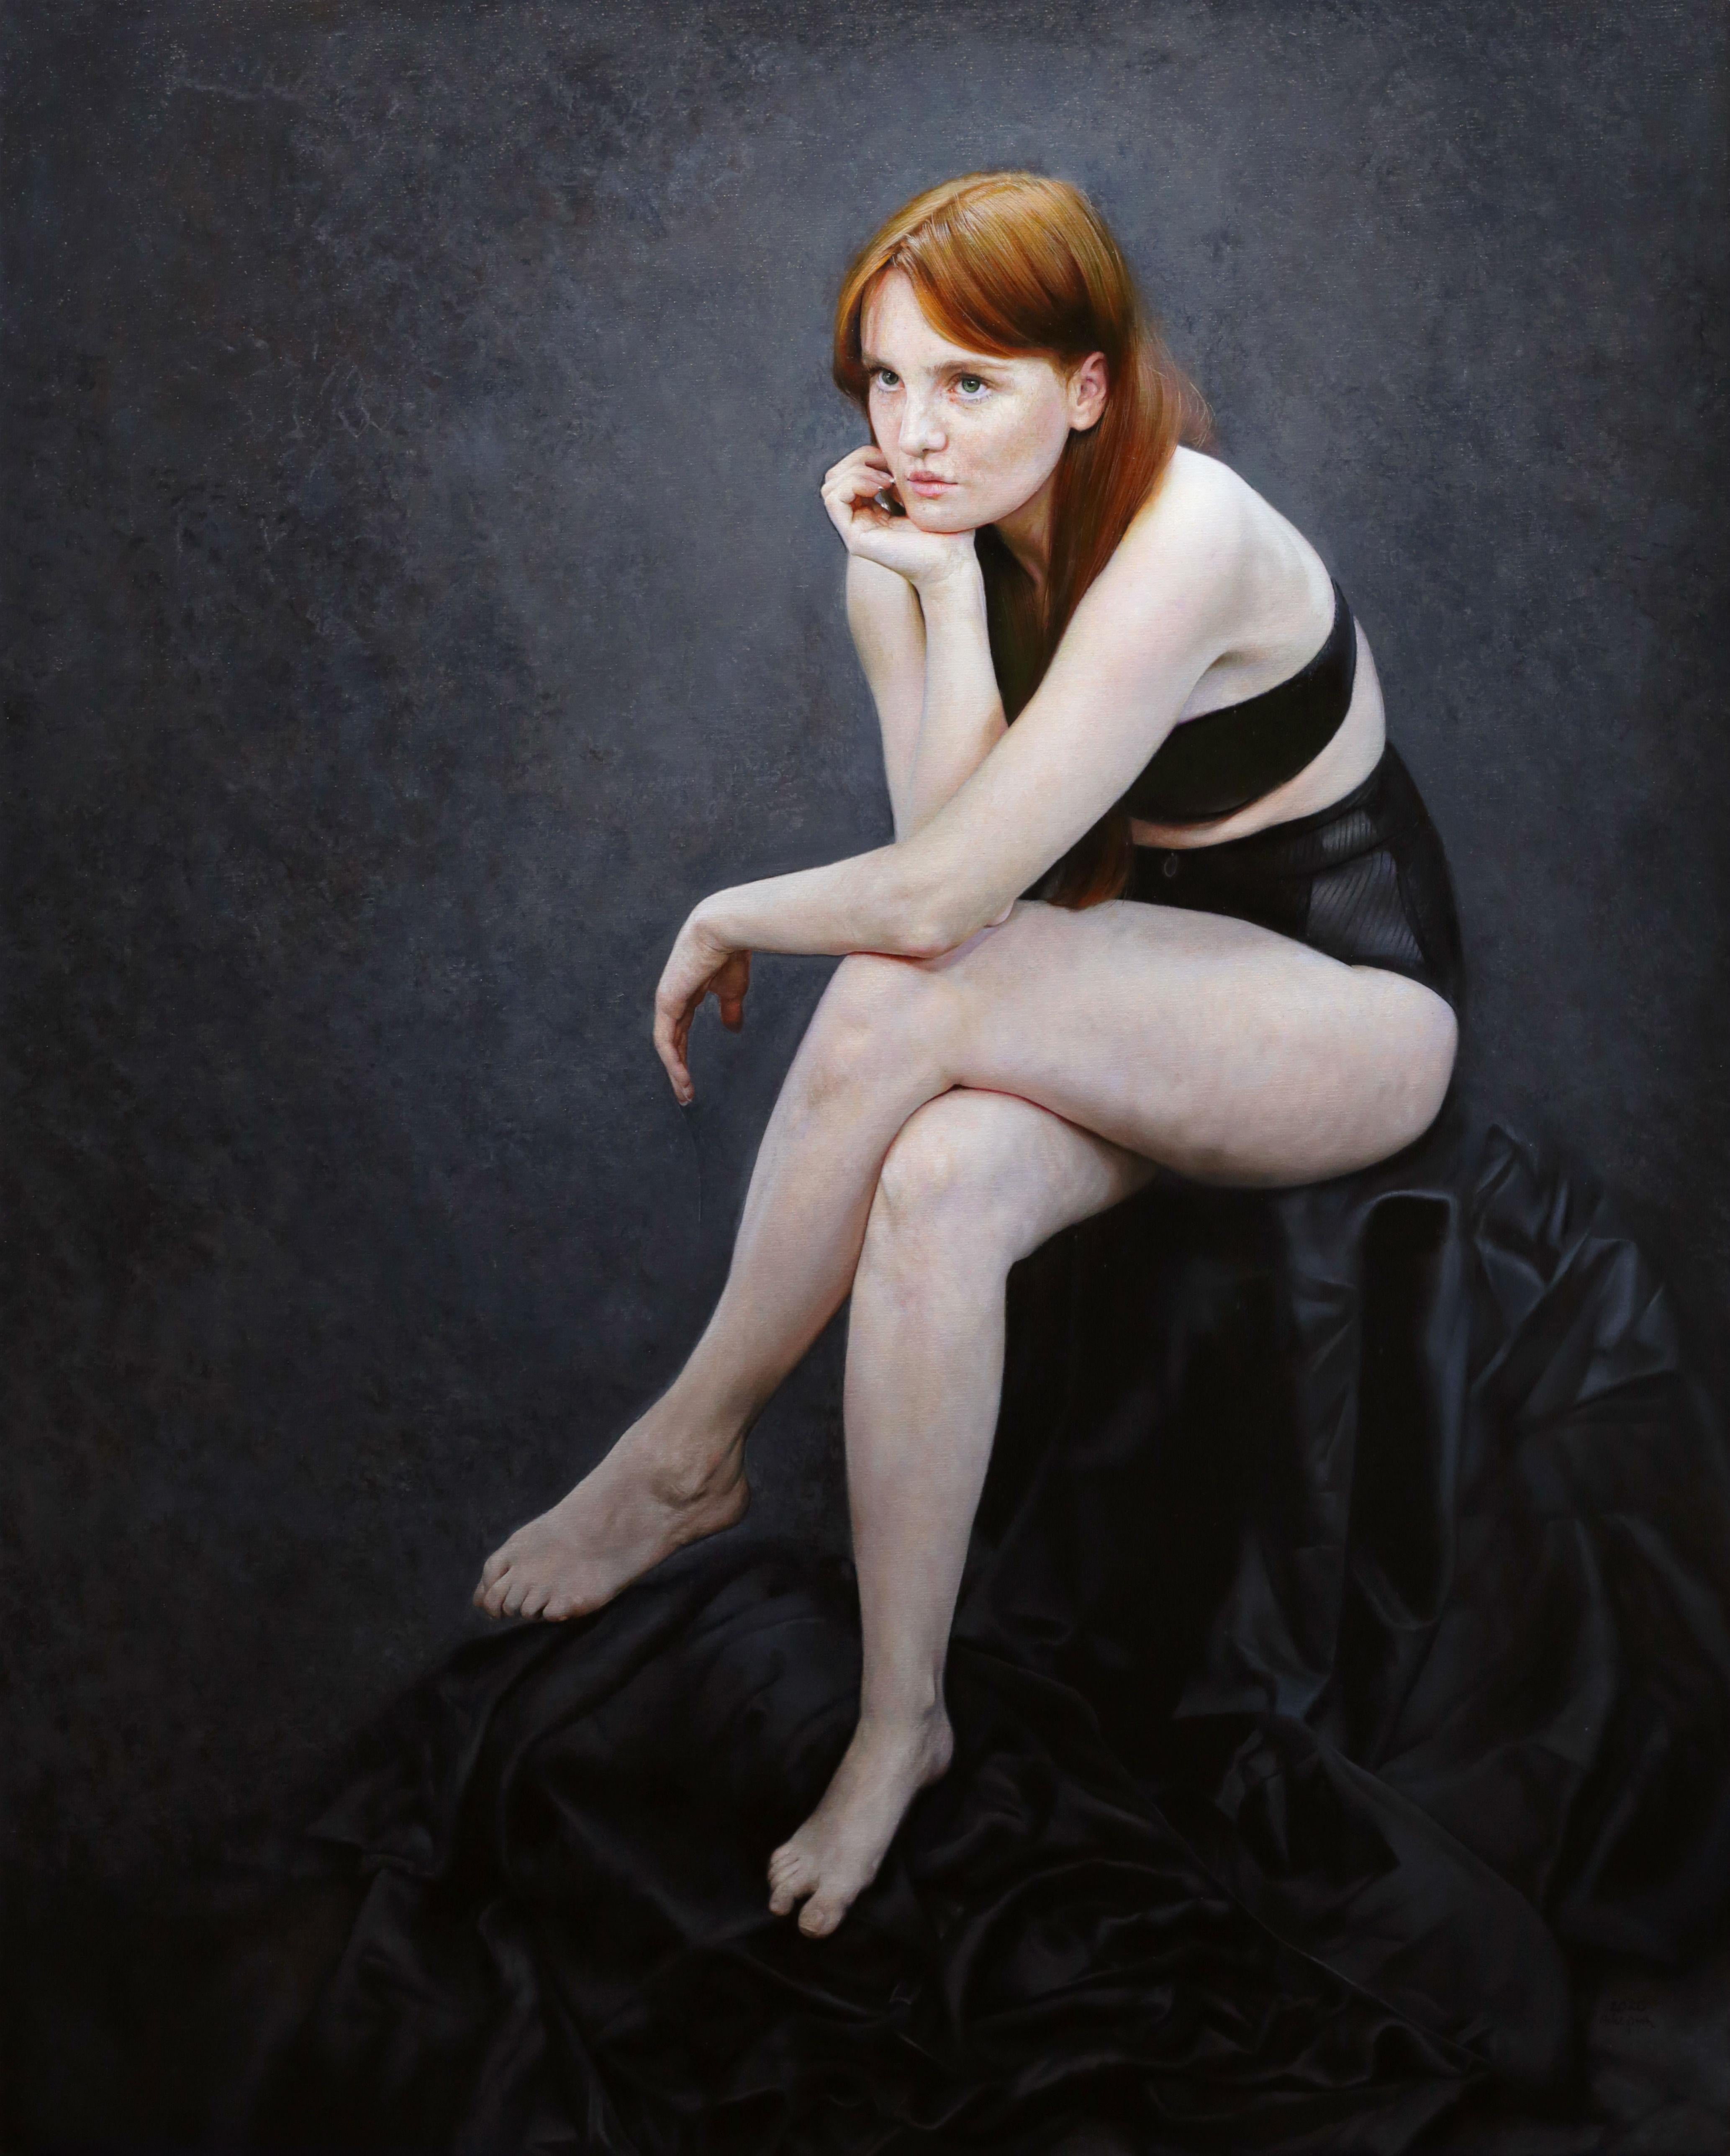 Anna Wypch Figurative Painting - "The Thinker:" Portrait Painting of a Pensive Redhead